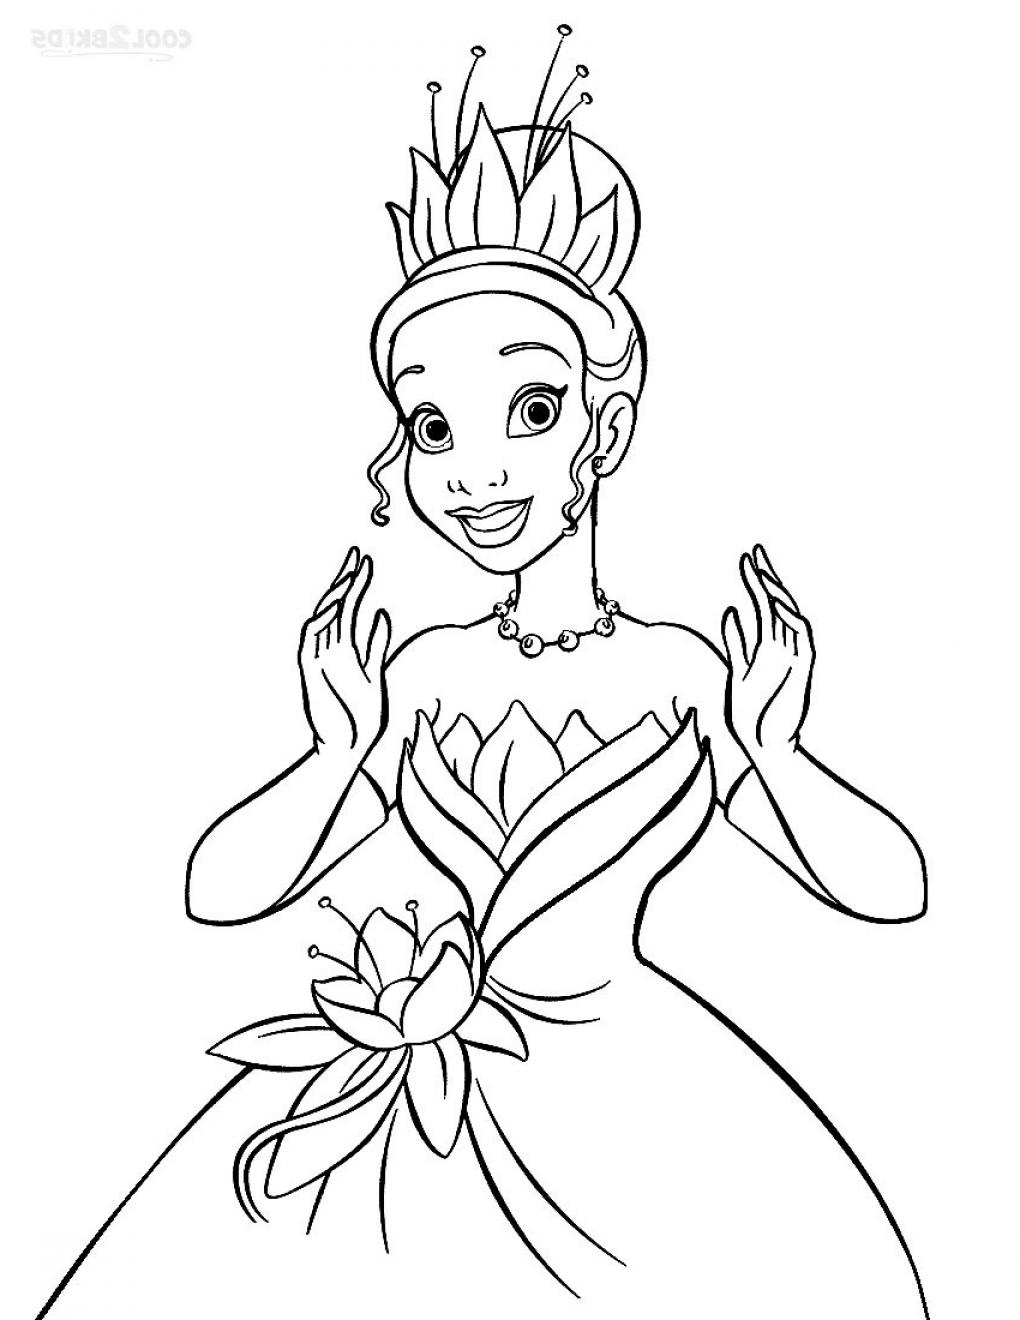 Printable Princess Tiana Coloring Pages For Kids | Cool2bKids ...